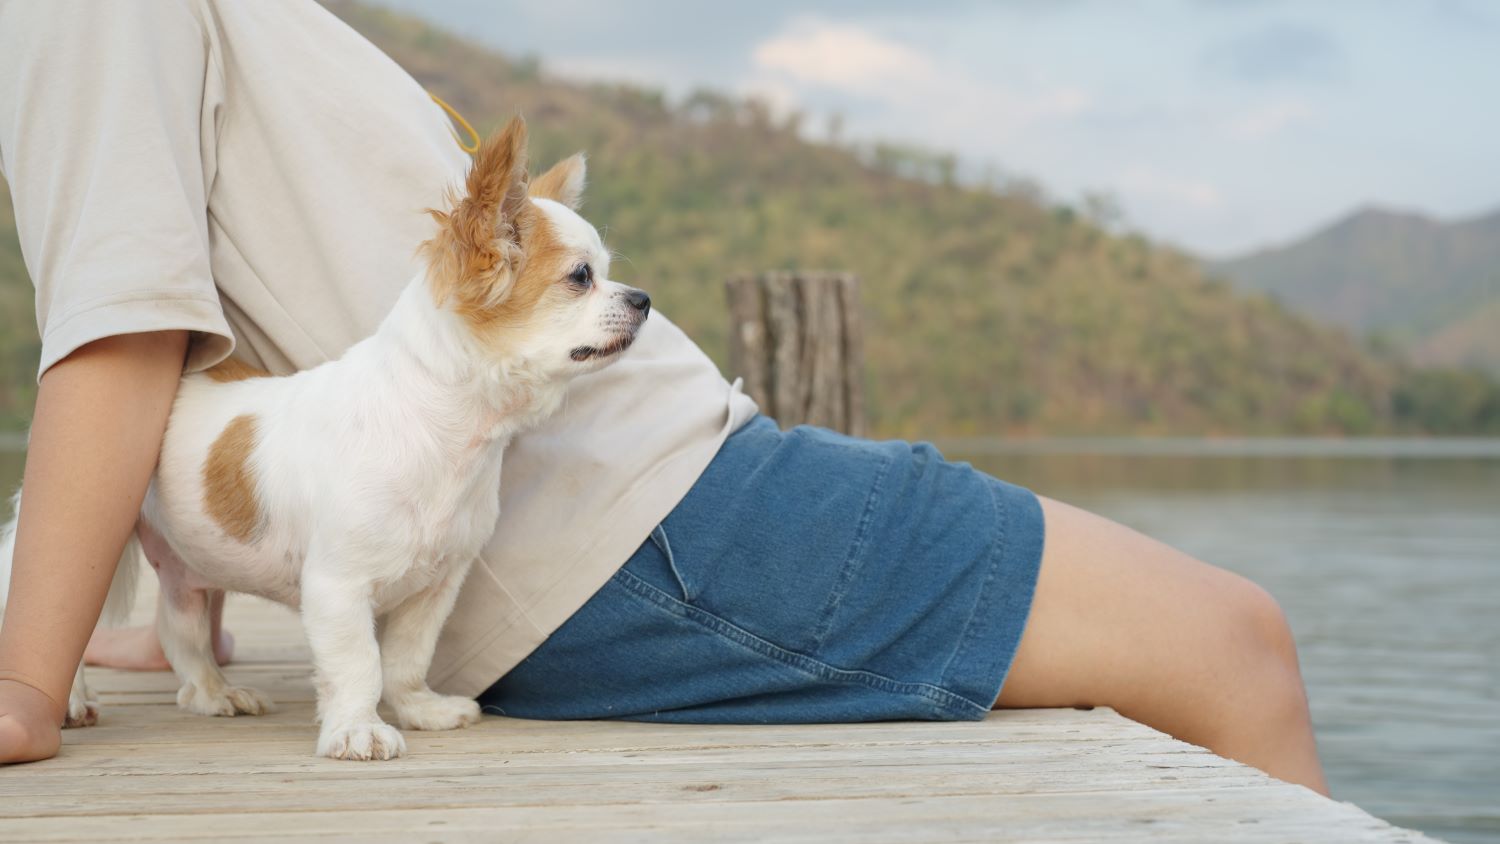 How Pet Insurance Benefits Both You and Your Pet